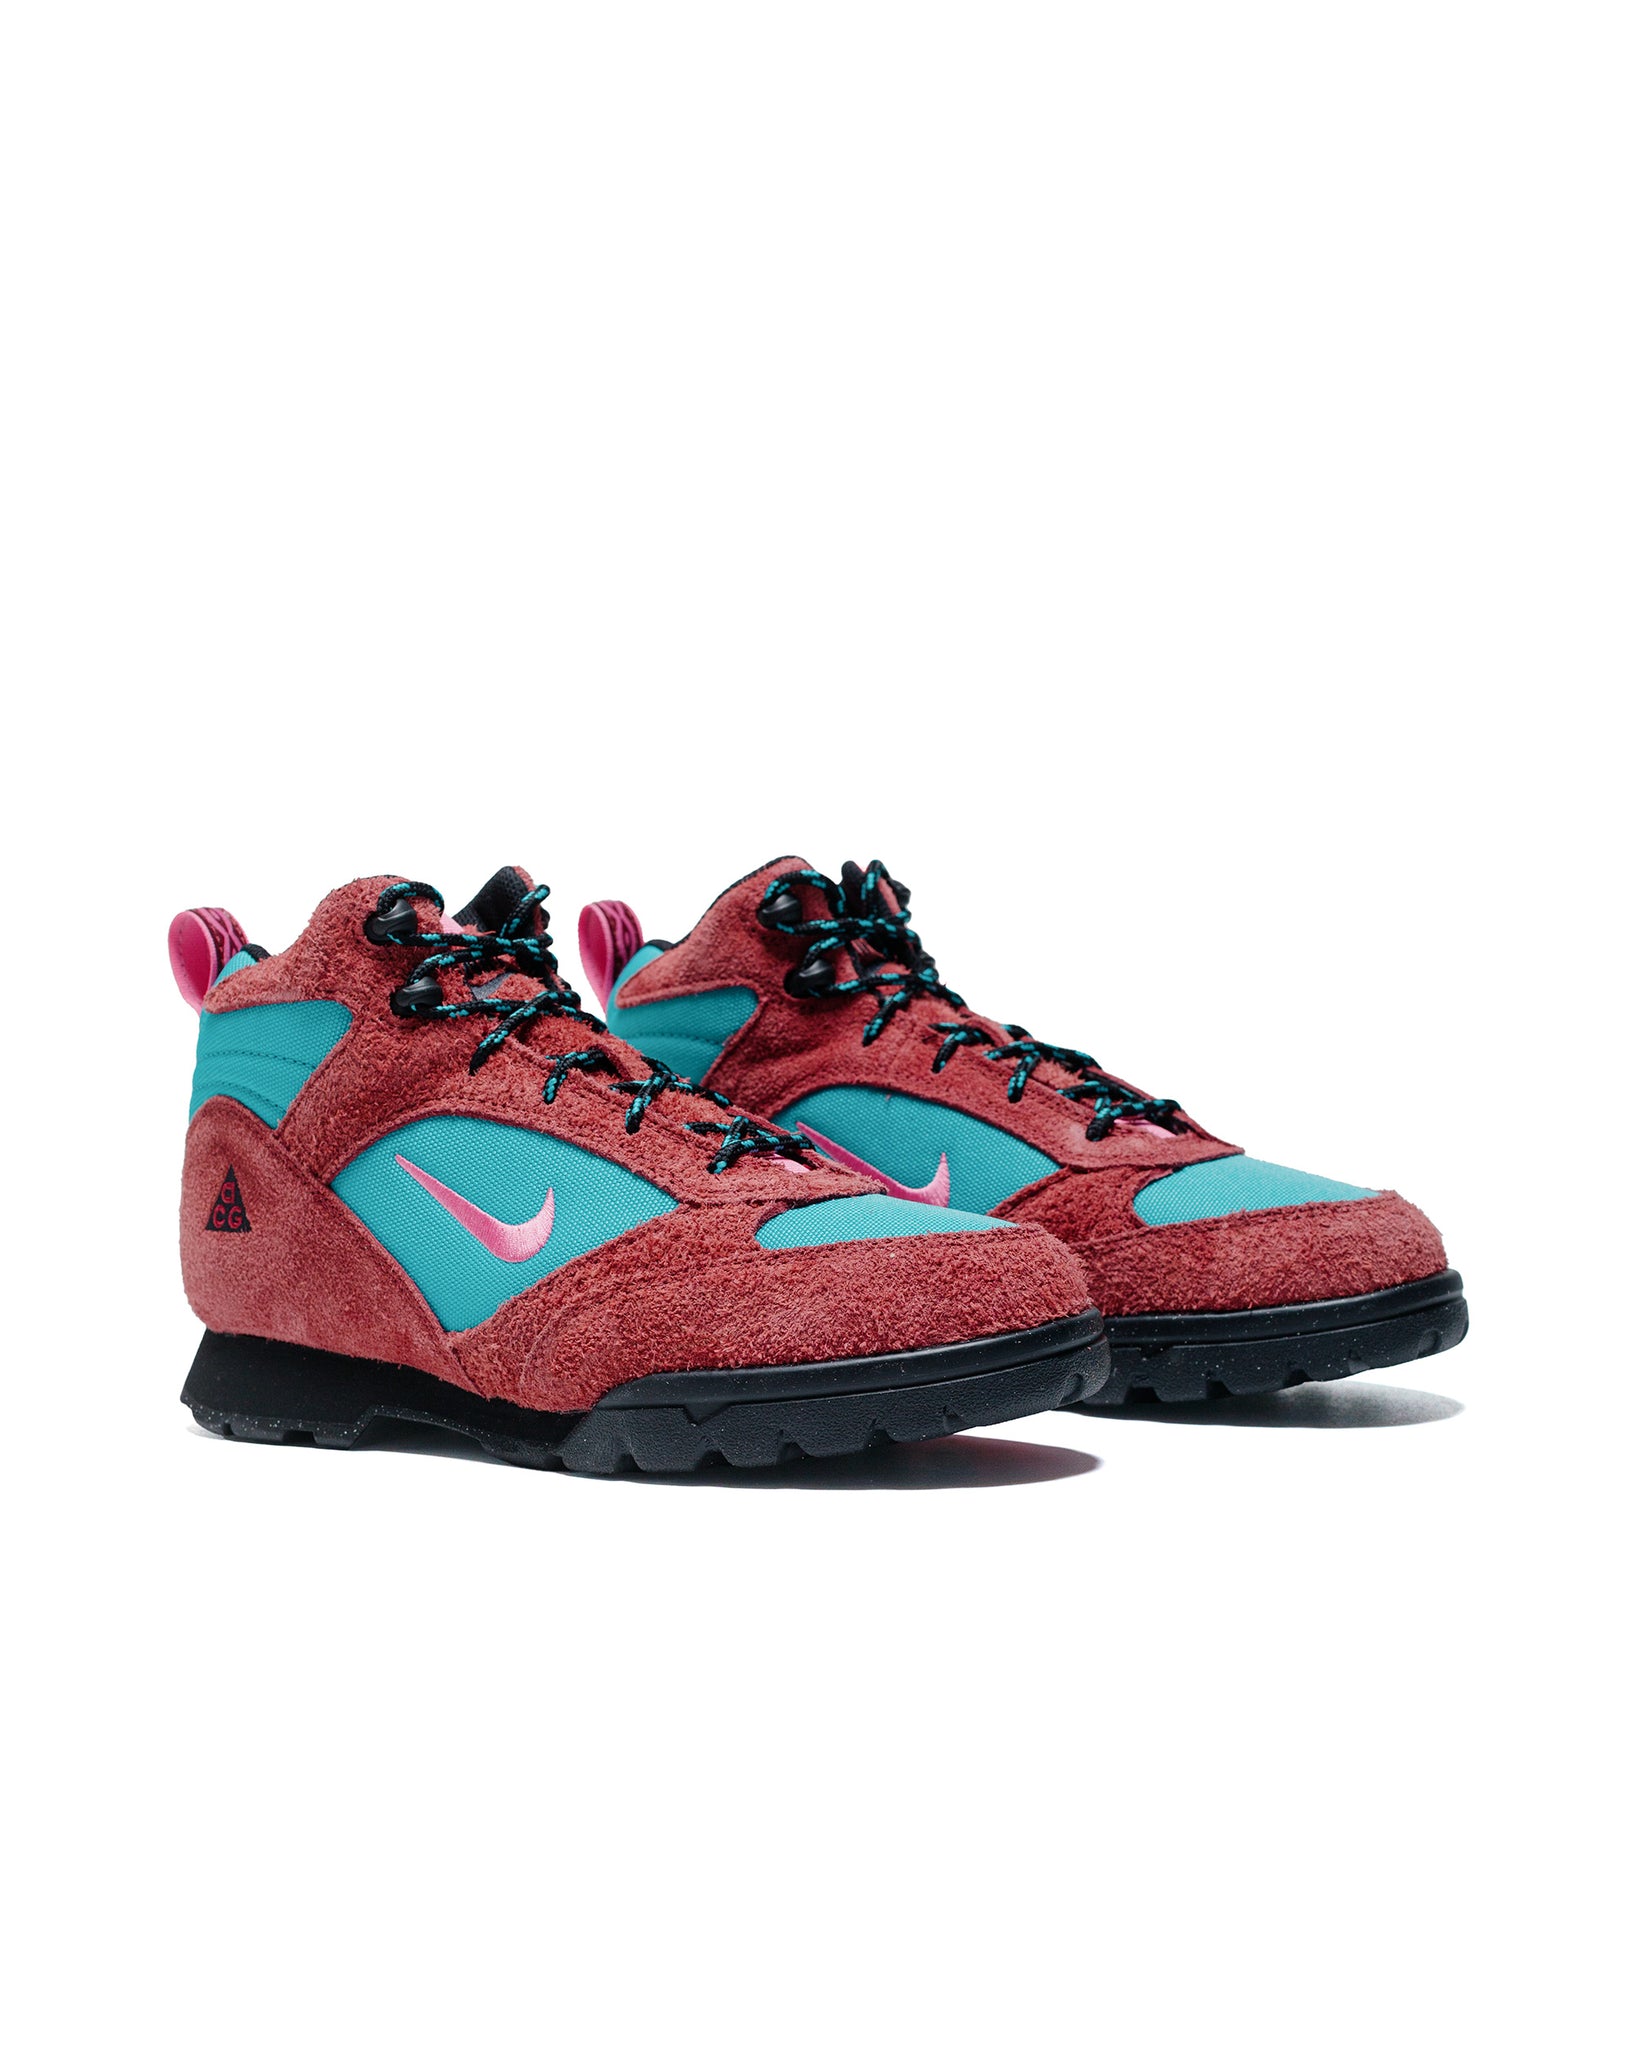 Nike ACG Torre Mid Team Red/Pinksicle side